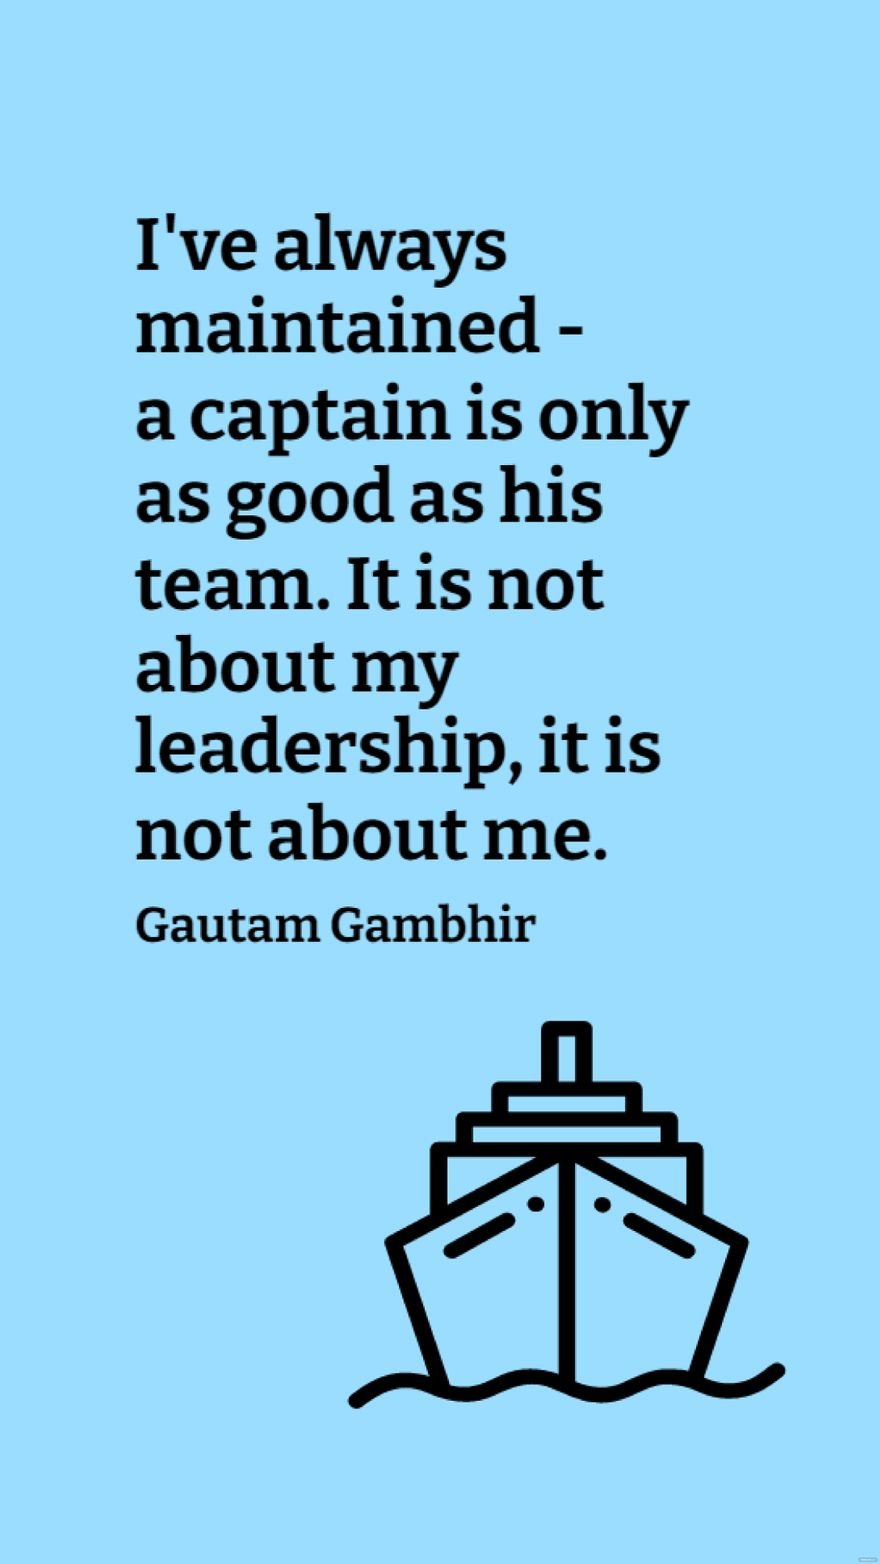 Gautam Gambhir - I've always maintained - a captain is only as good as his team. It is not about my leadership, it is not about me.